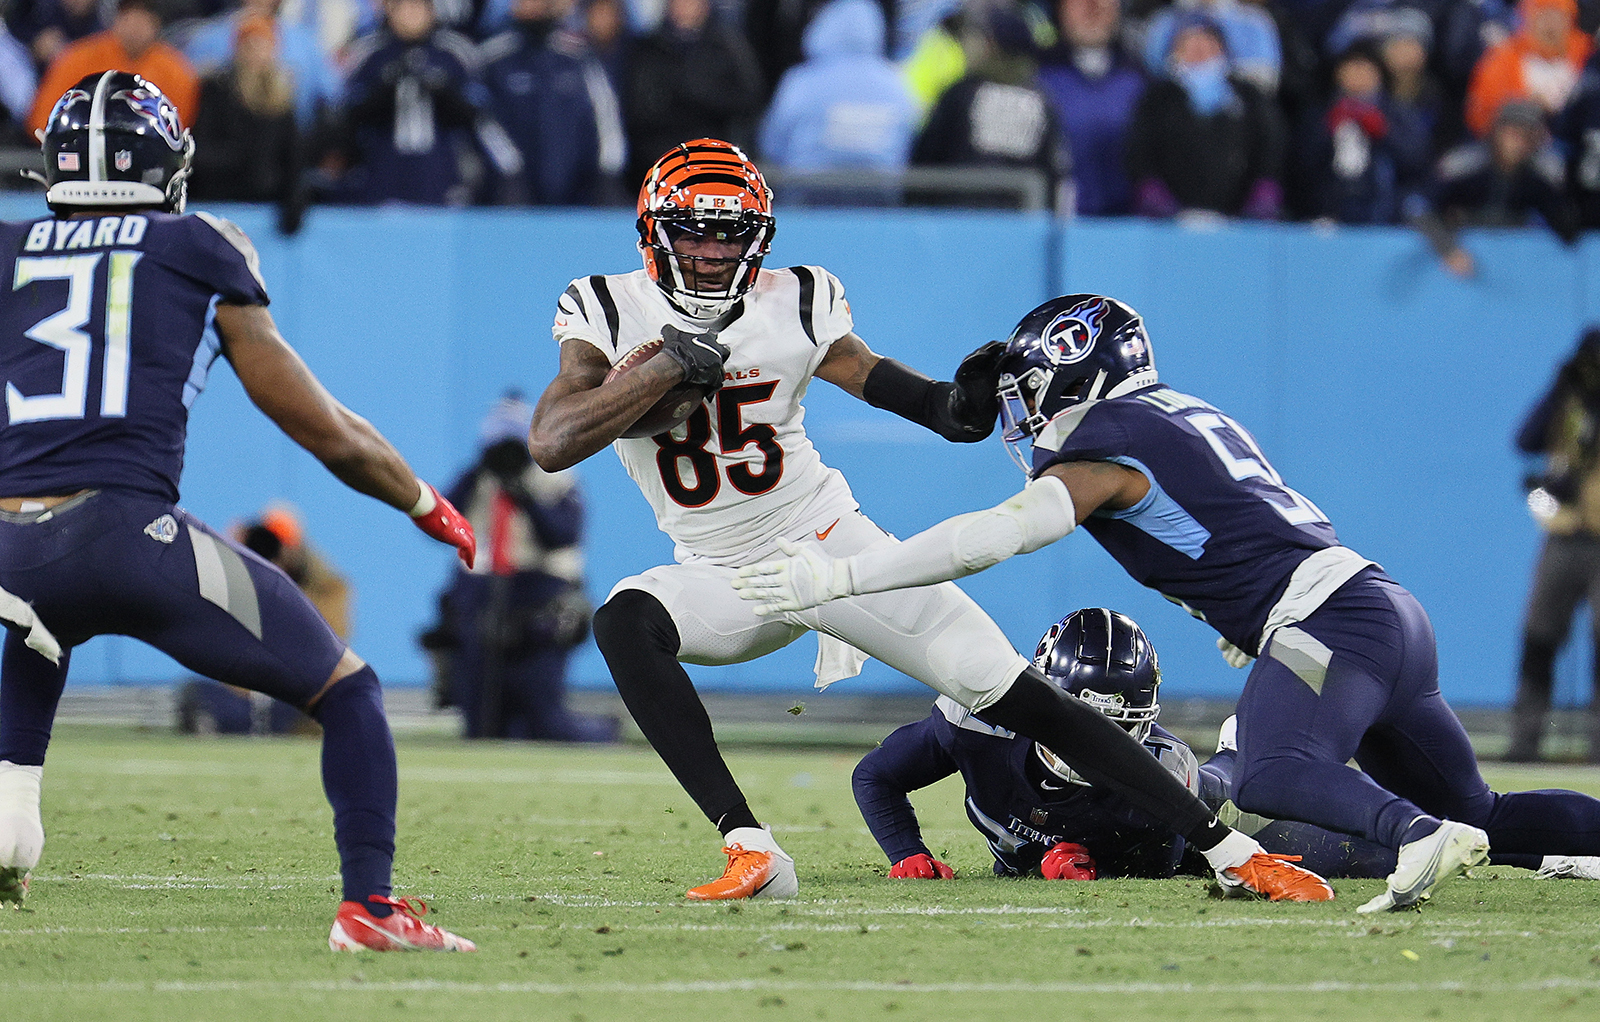 Tee Higgins #85 of the Cincinnati Bengals plays against the Tennessee Titans during the AFC Divisional Playoff at Nissan Stadium on January 22, in Nashville, Tennessee. 